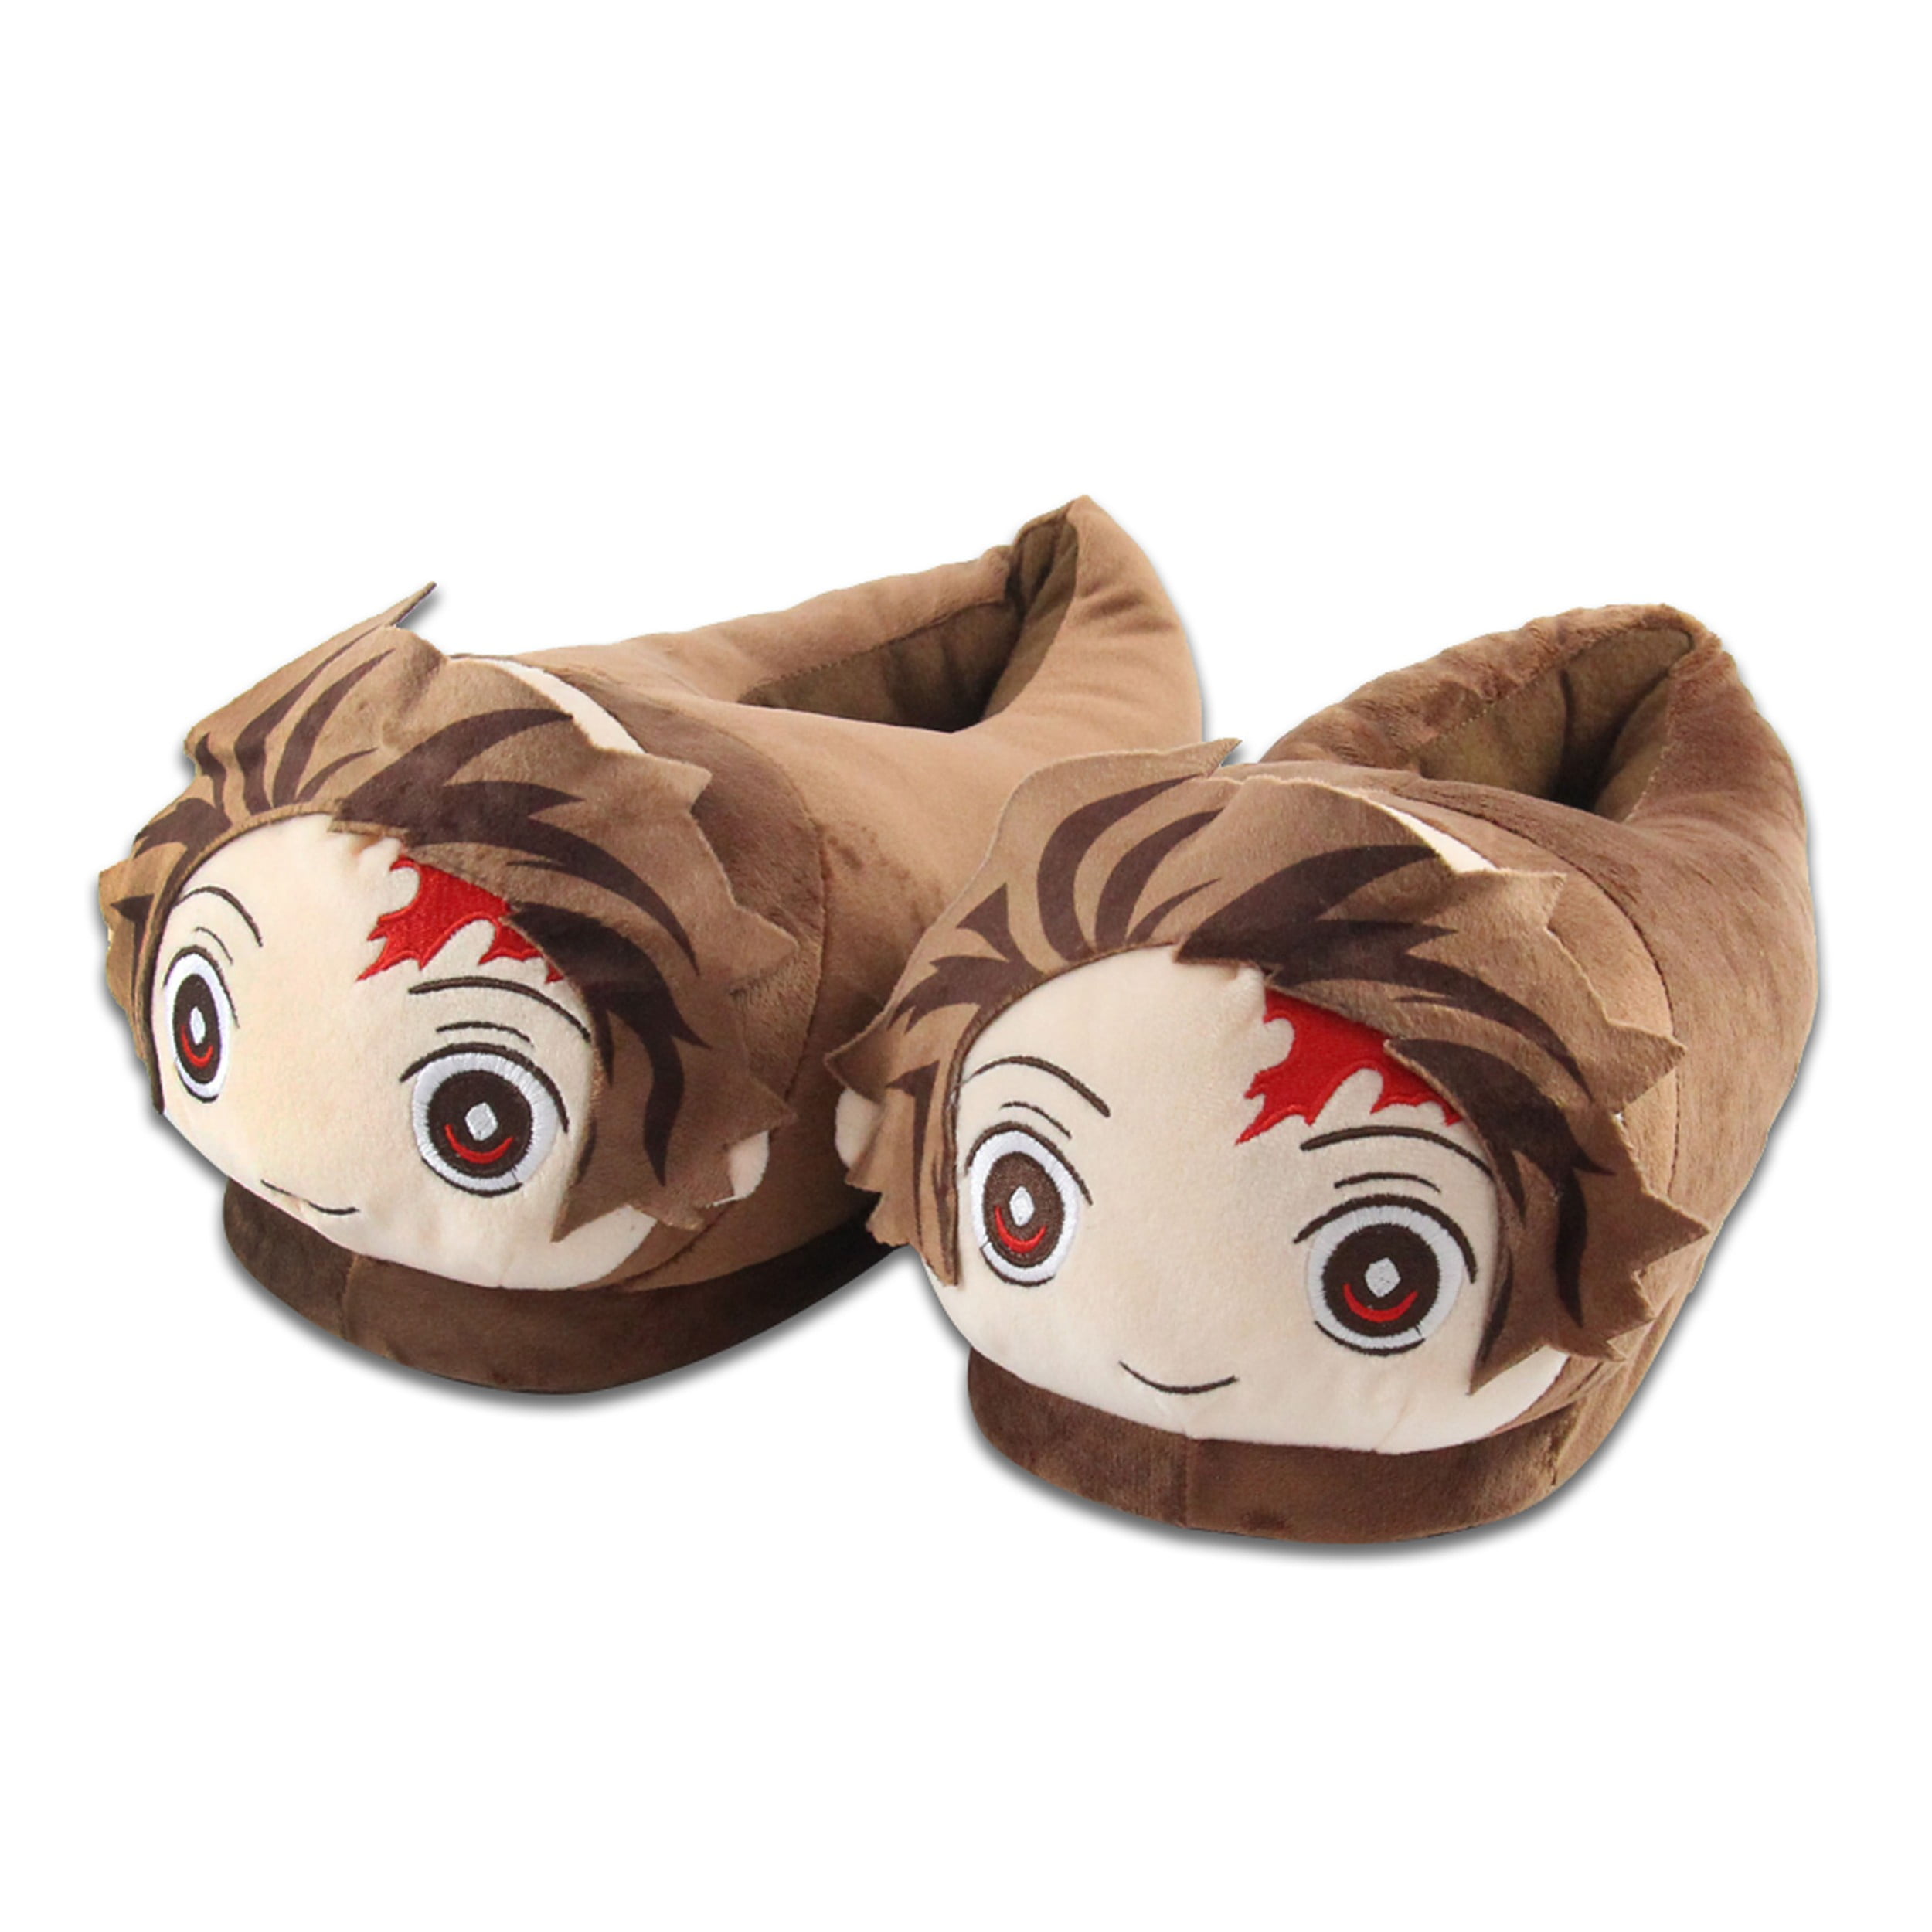 China Supplier Women Winter Home Slippers Unisex Soft Winter Warm House  Slippers Indoor Bedroom Shoes  China Women Slippers and Slippers price   MadeinChinacom